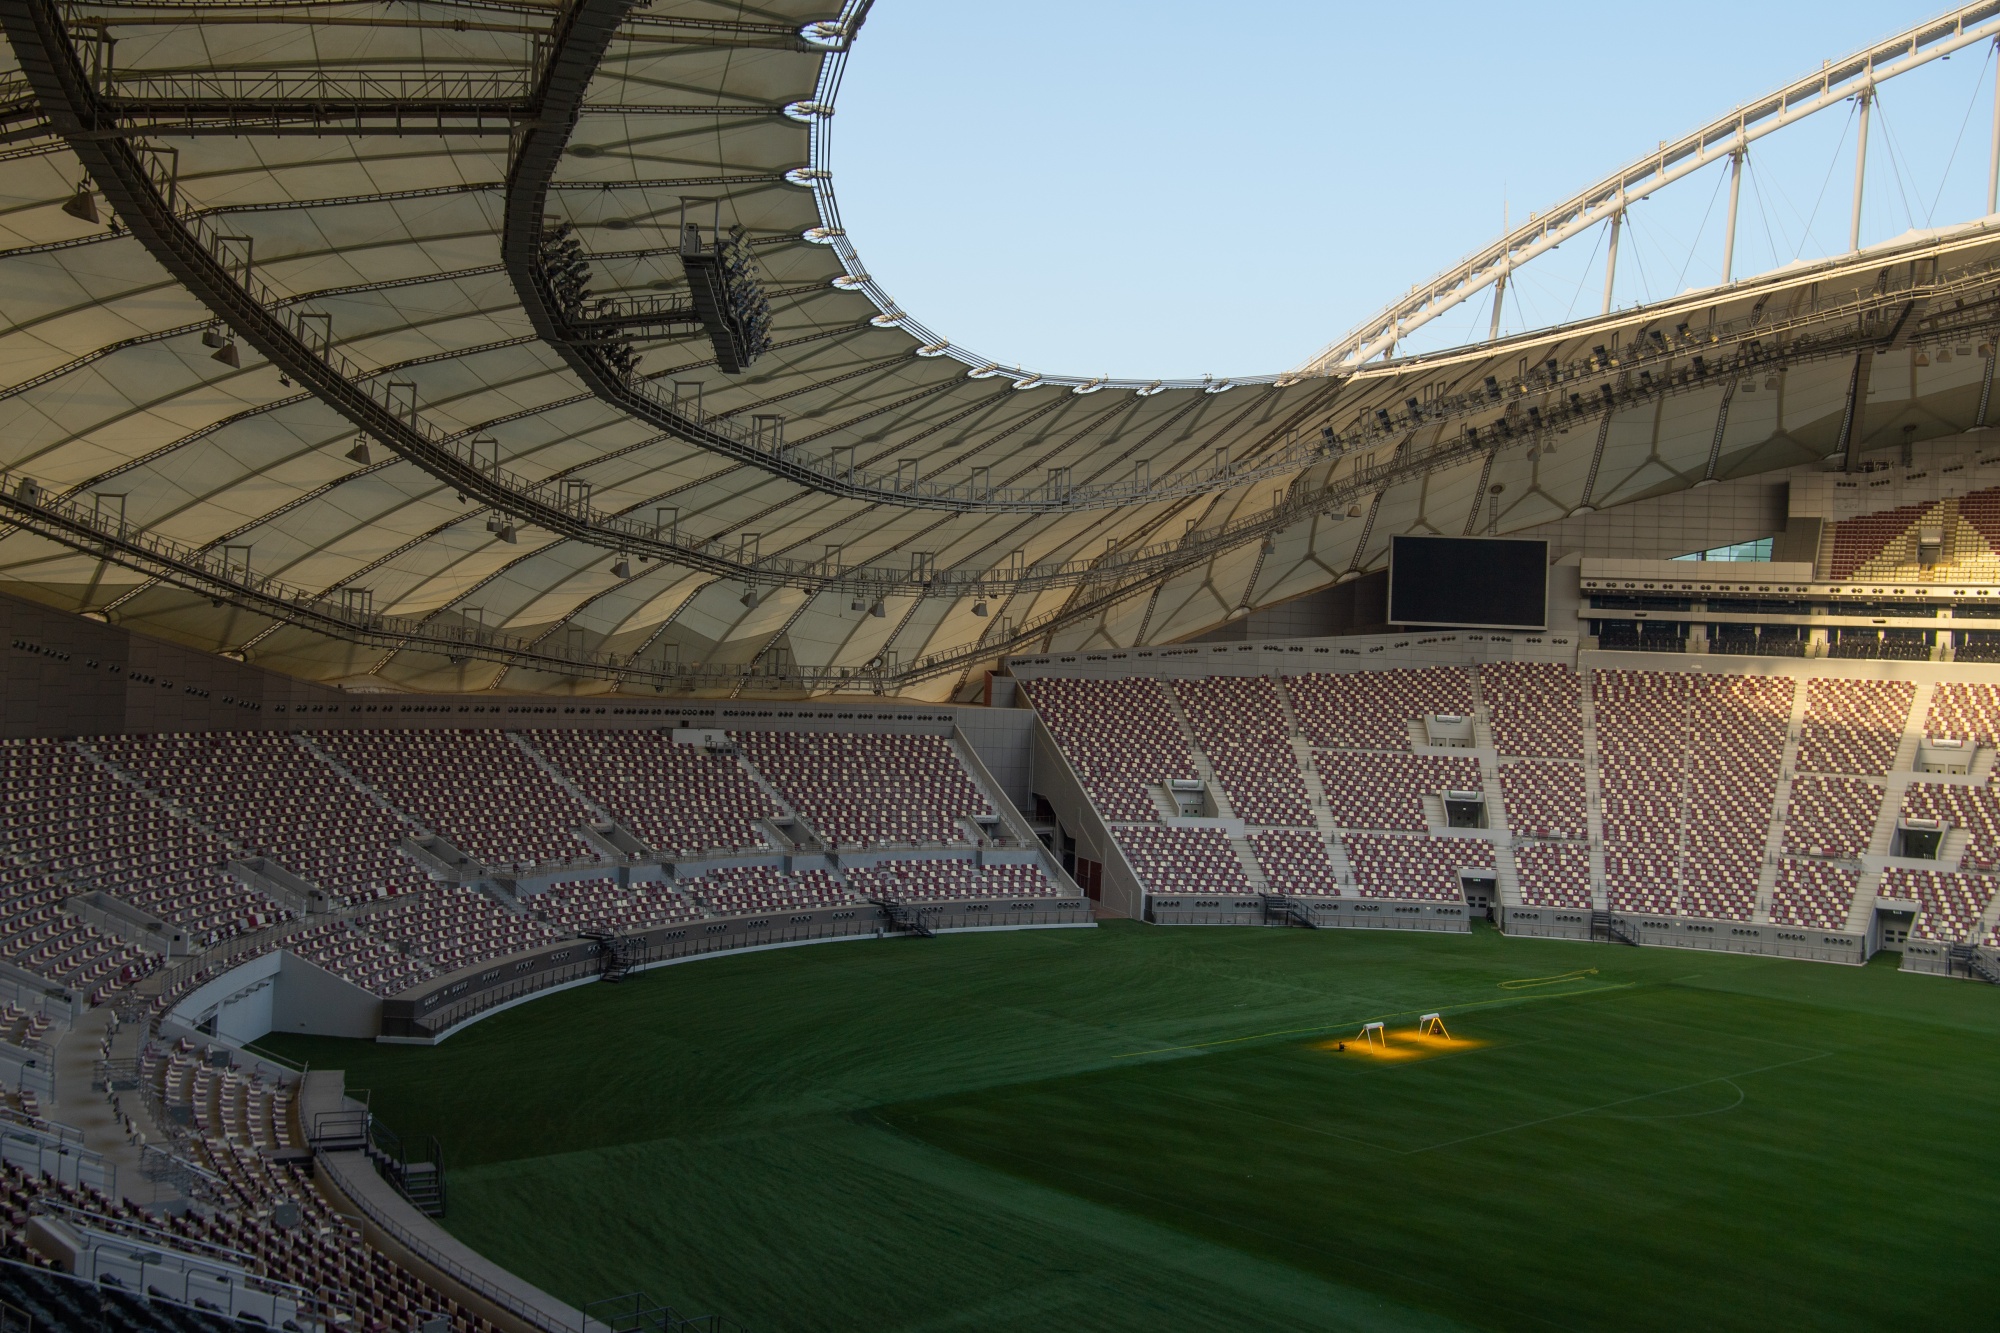 This Football Stadium Is Tracking Its Carbon Footprint in Real